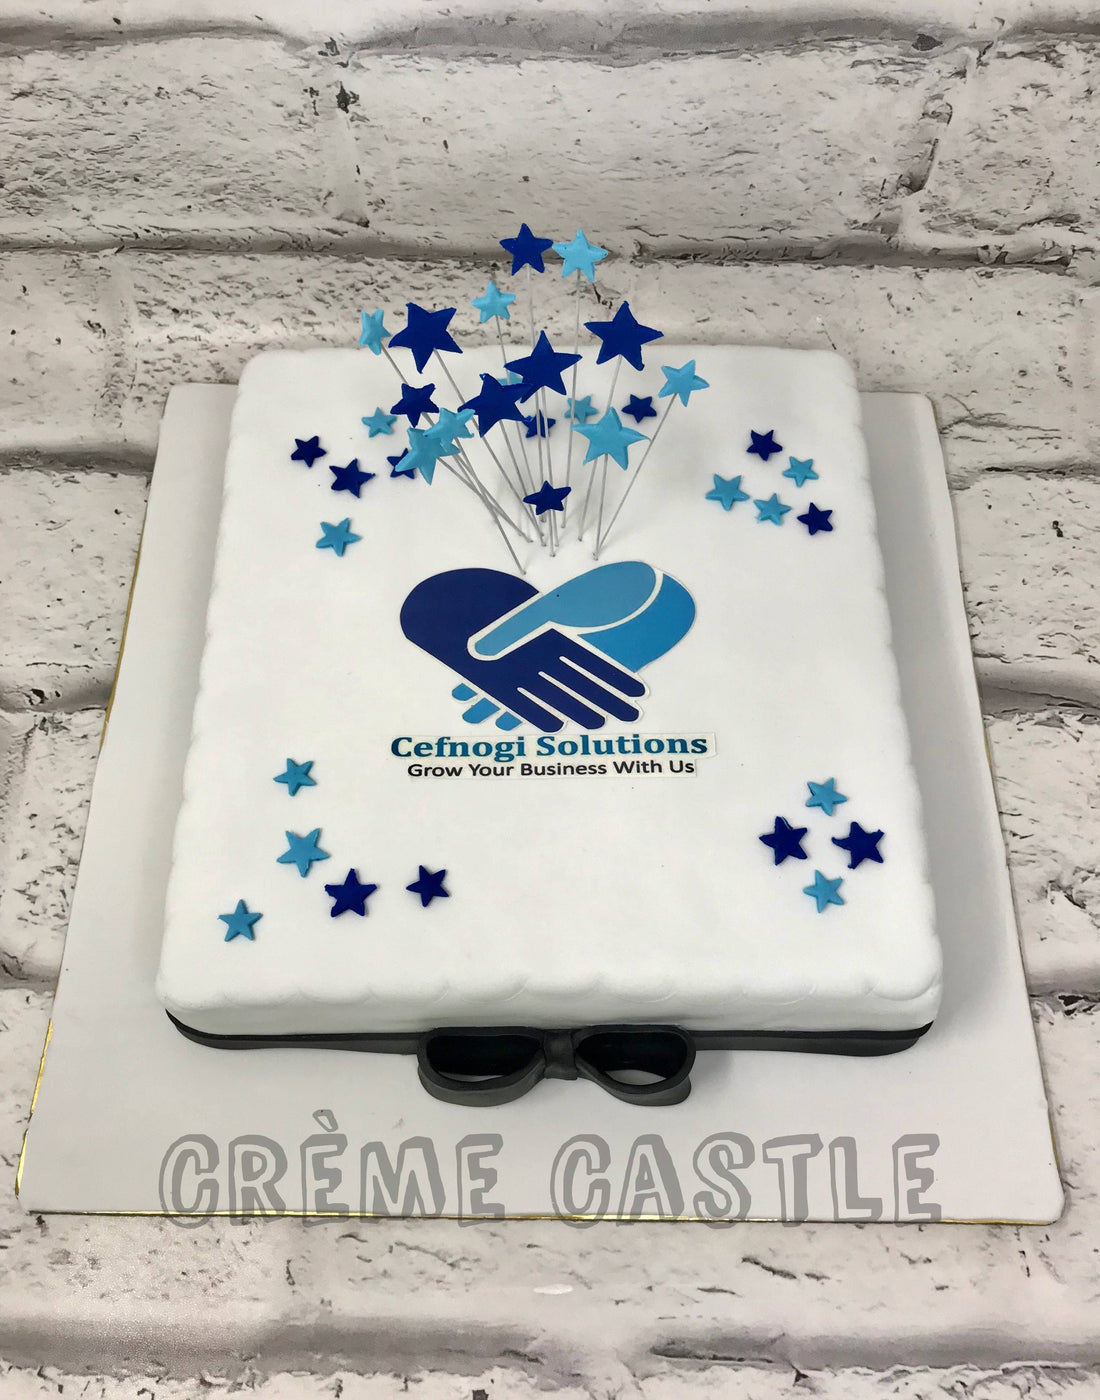 Corporate Theme Cake for Anniversary by Creme Castle